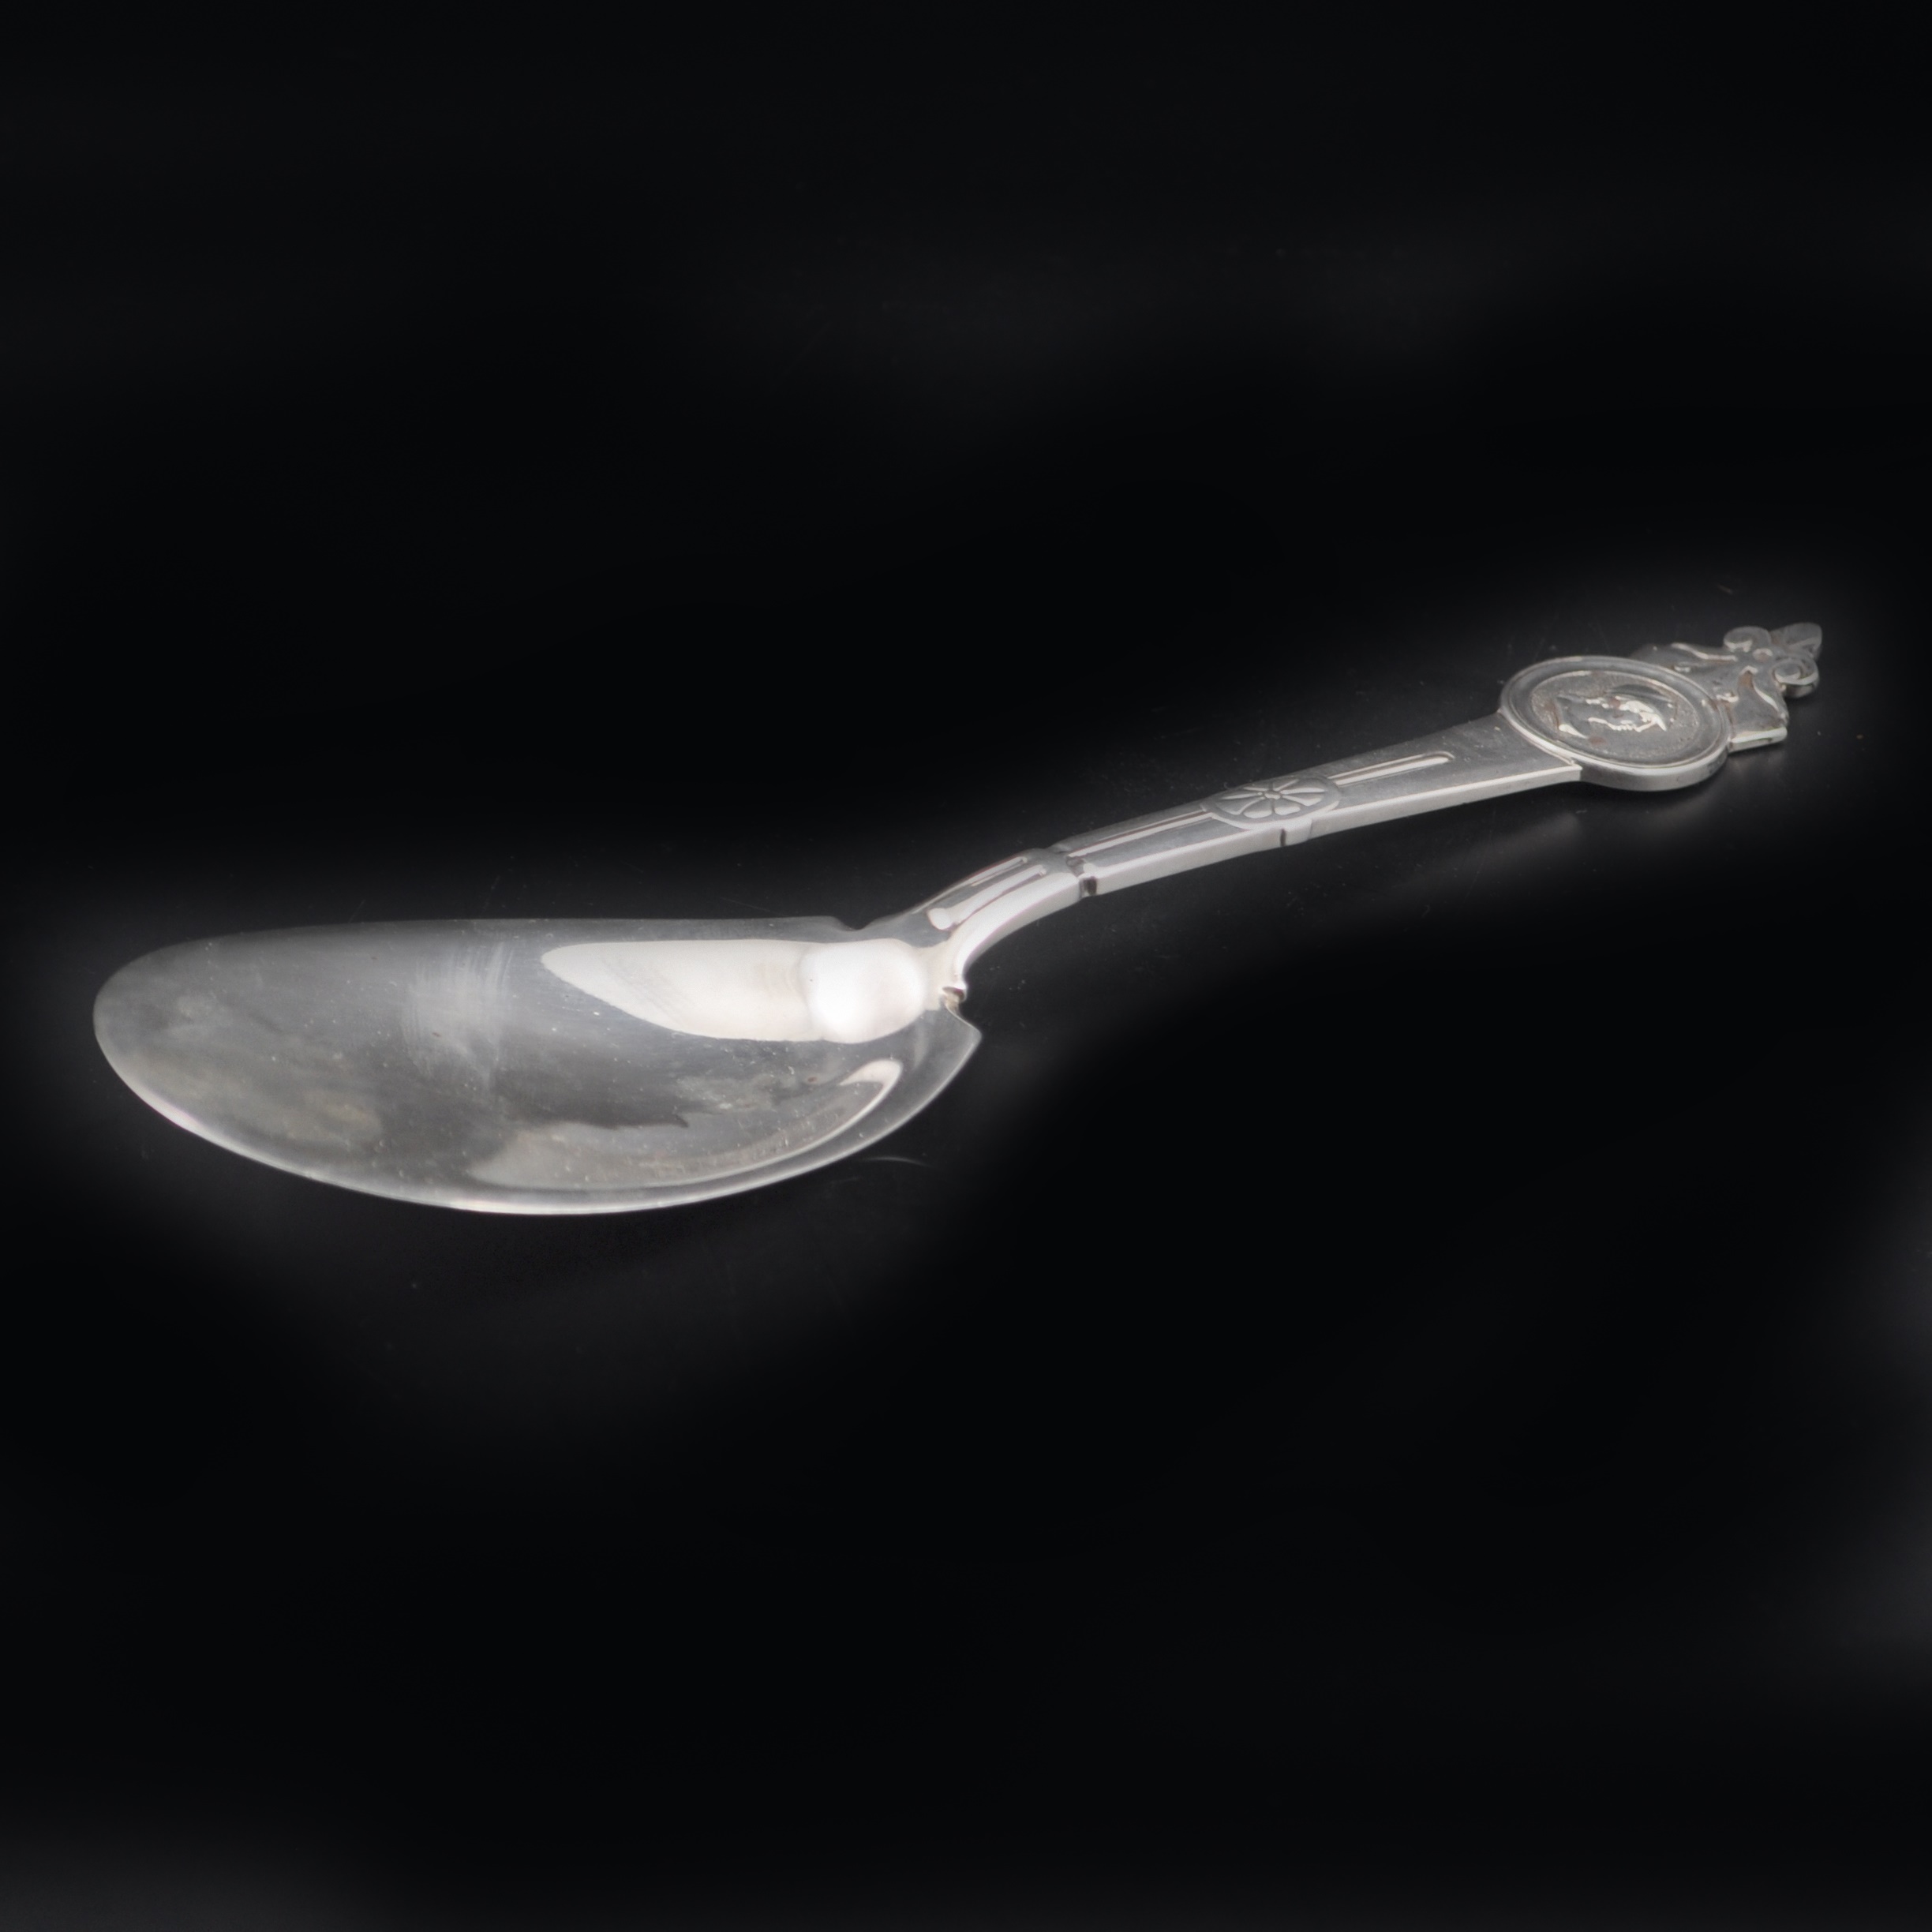 A sterling silver serving spoon, by Gorham for Tiffany & Co, late 19th century